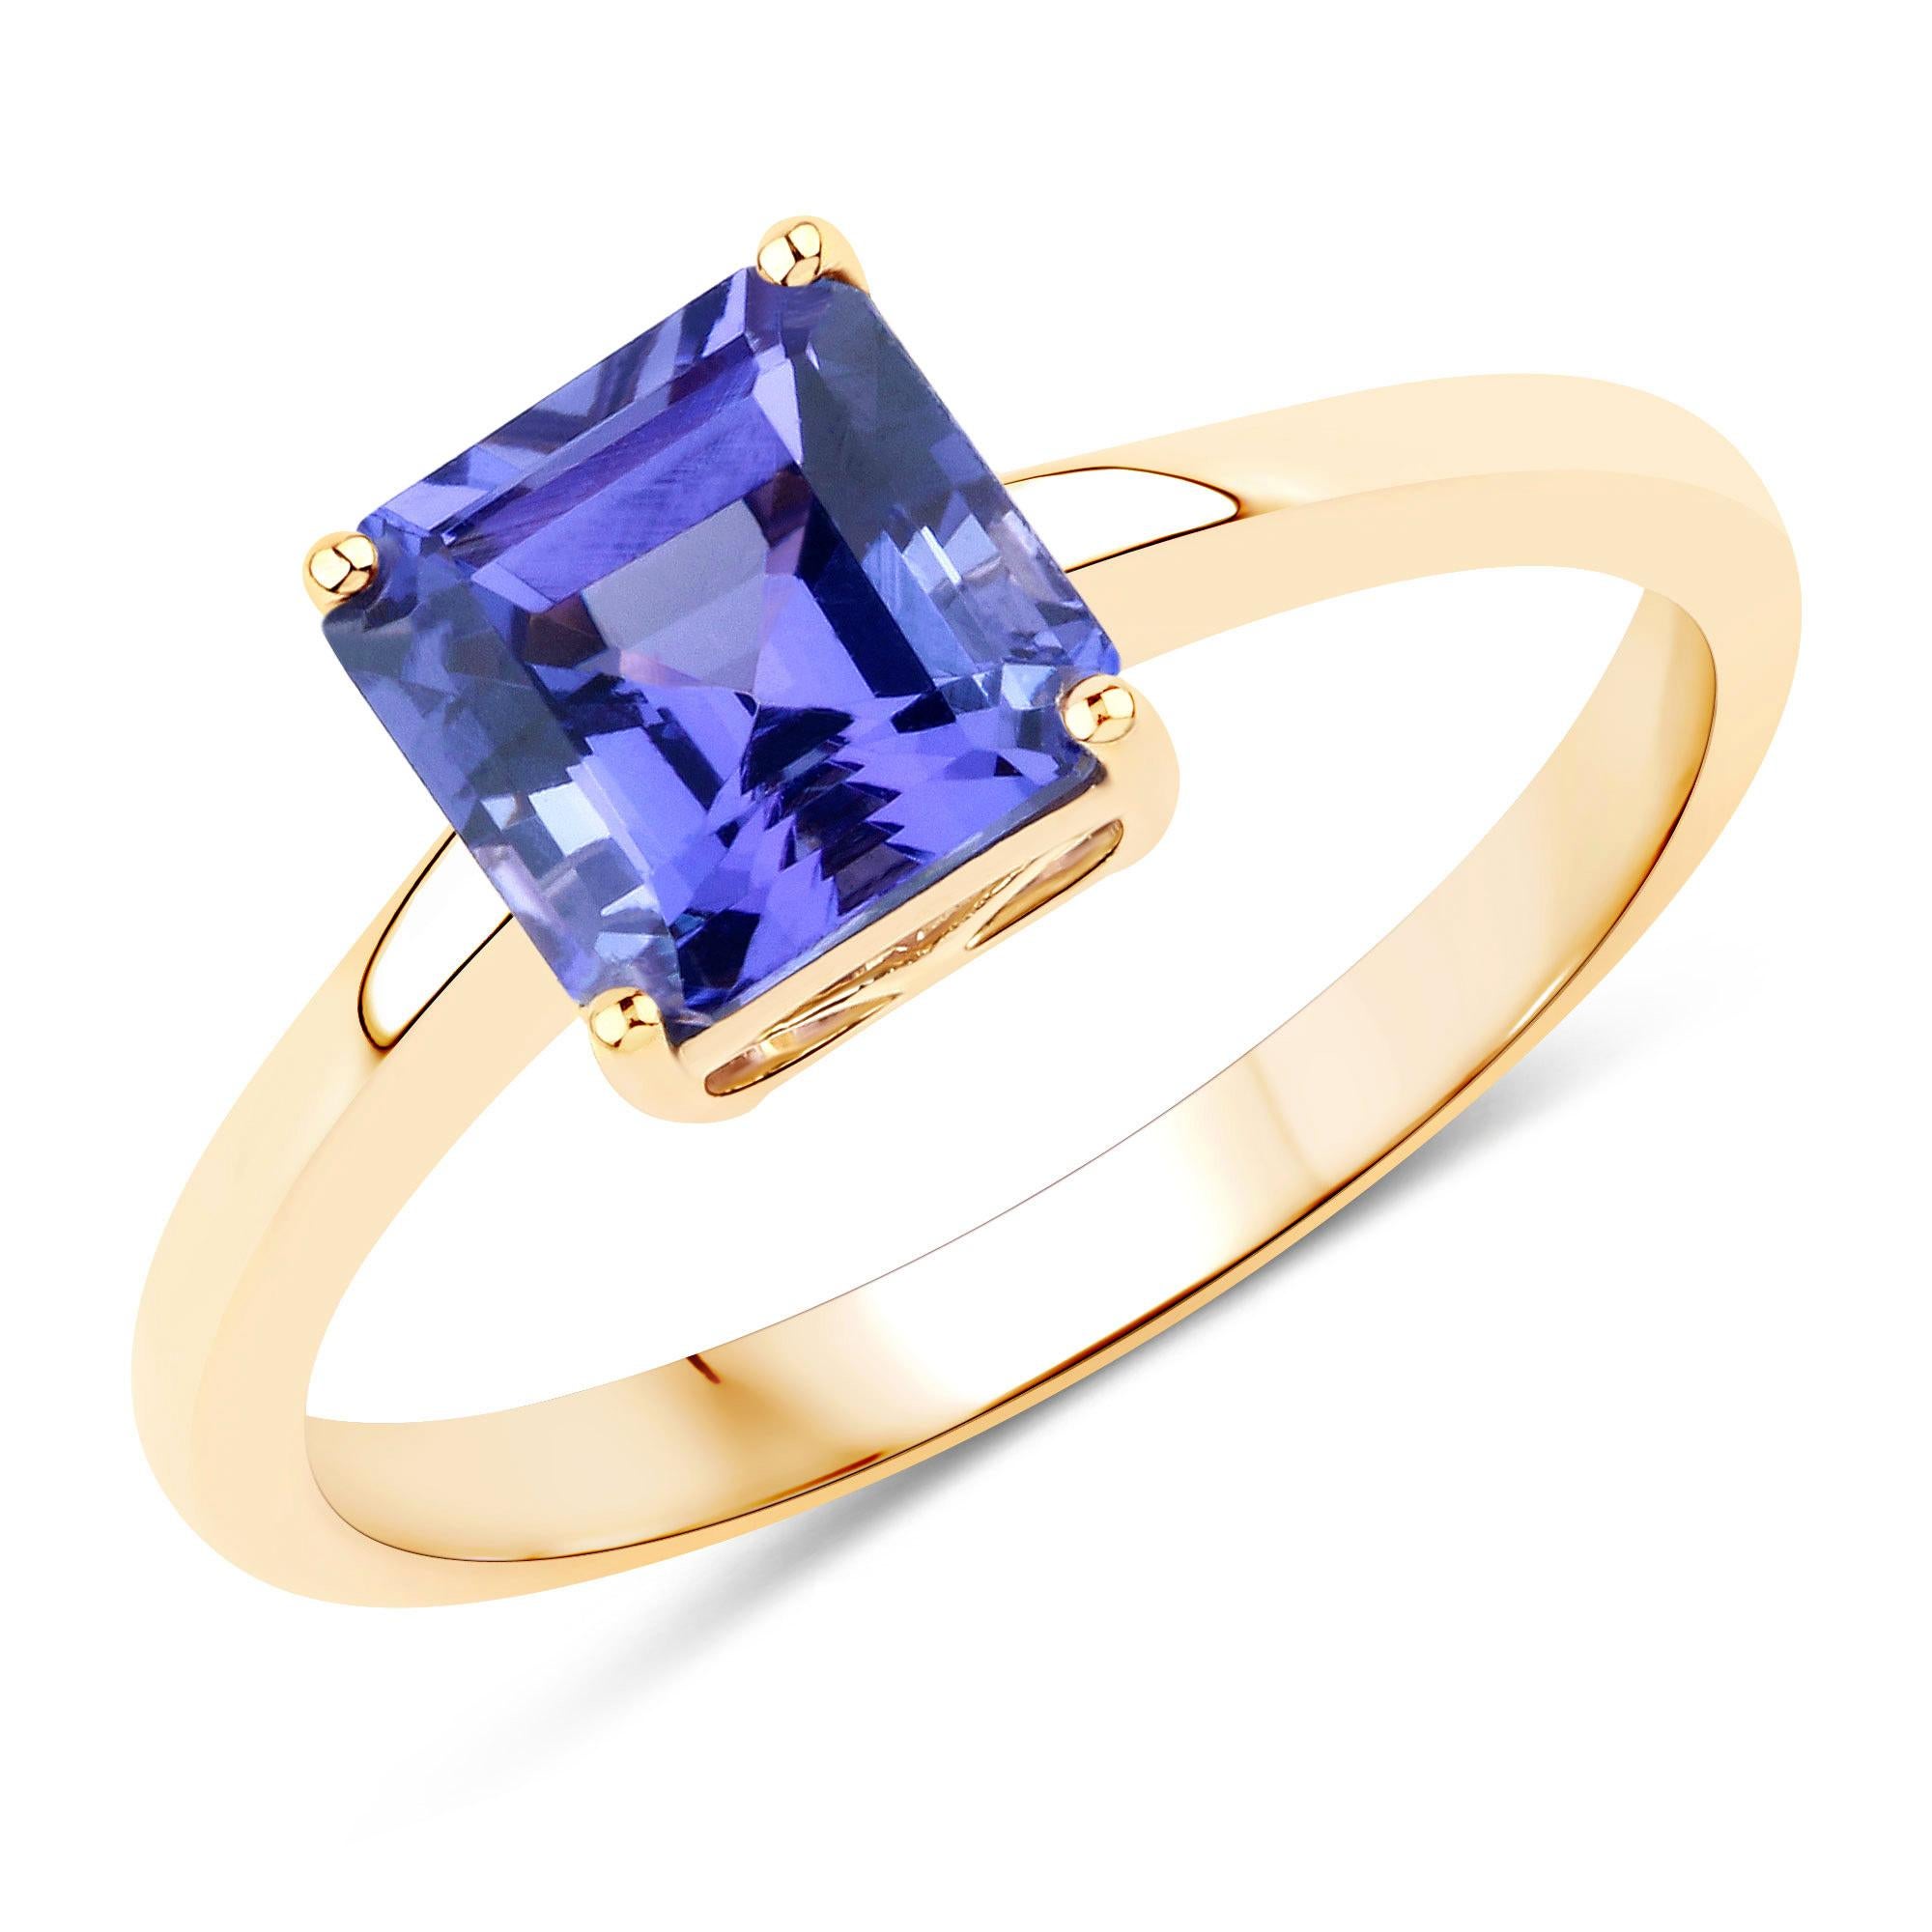 It comes with the appraisal by GIA GG/AJP
All Gemstones are Natural 
Radiant Cut Tanzanite = 1.78 Carat
Metal: 14K Yellow Gold
Ring Size: 7* US
*It can be resized complimentary